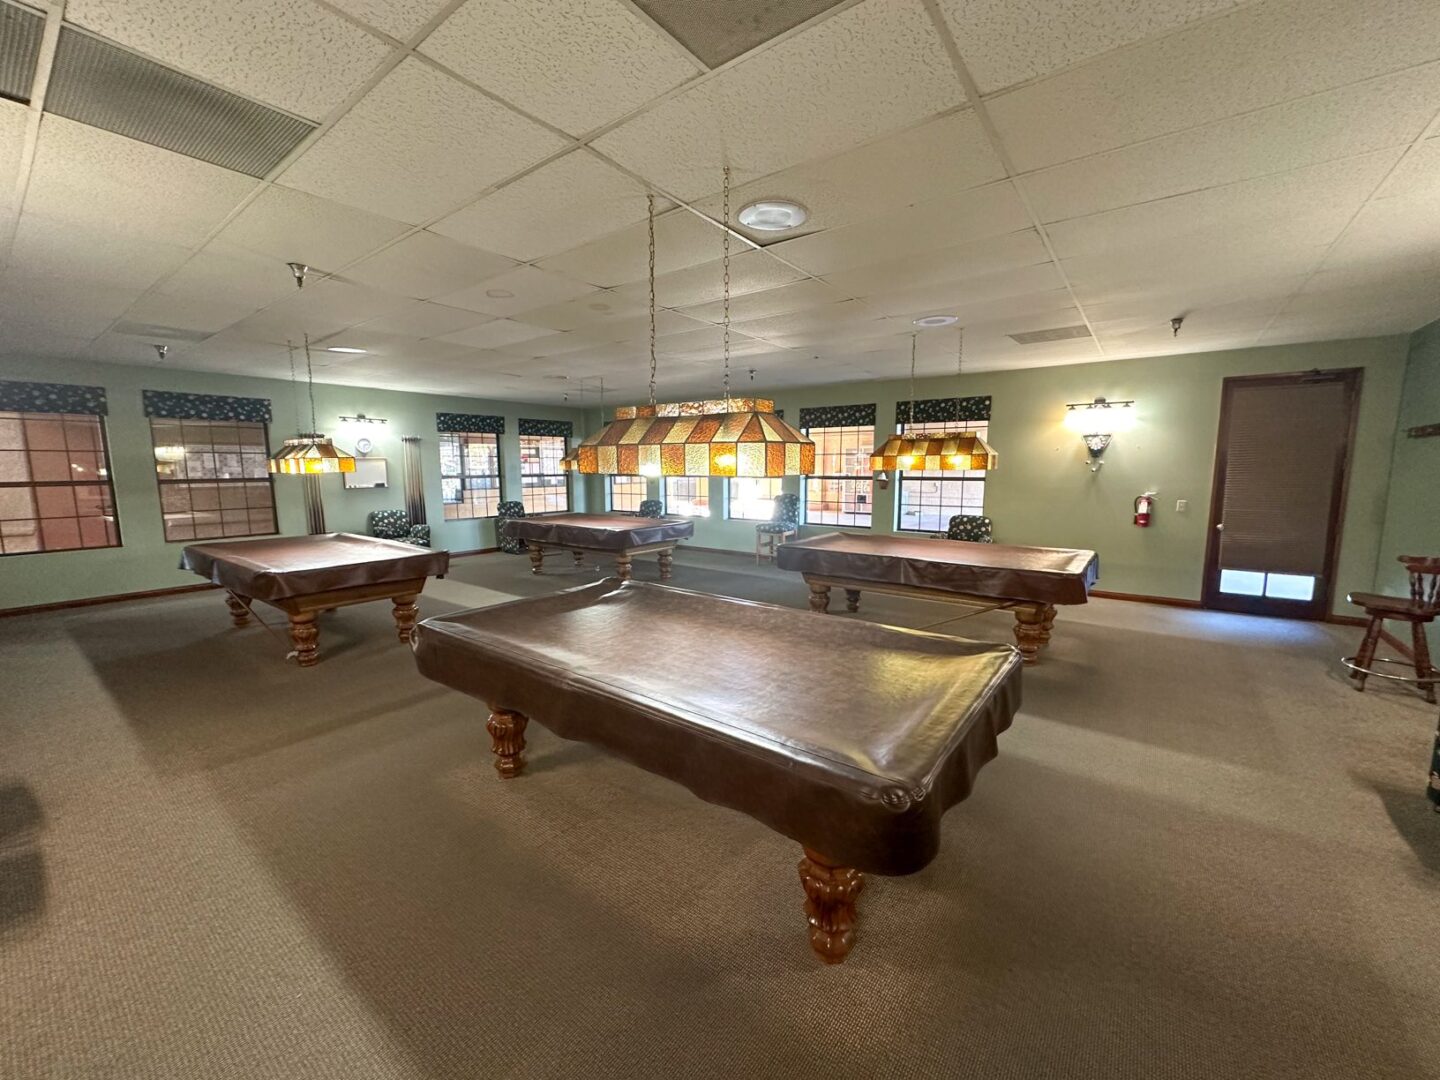 A room with a pool table and billiards.